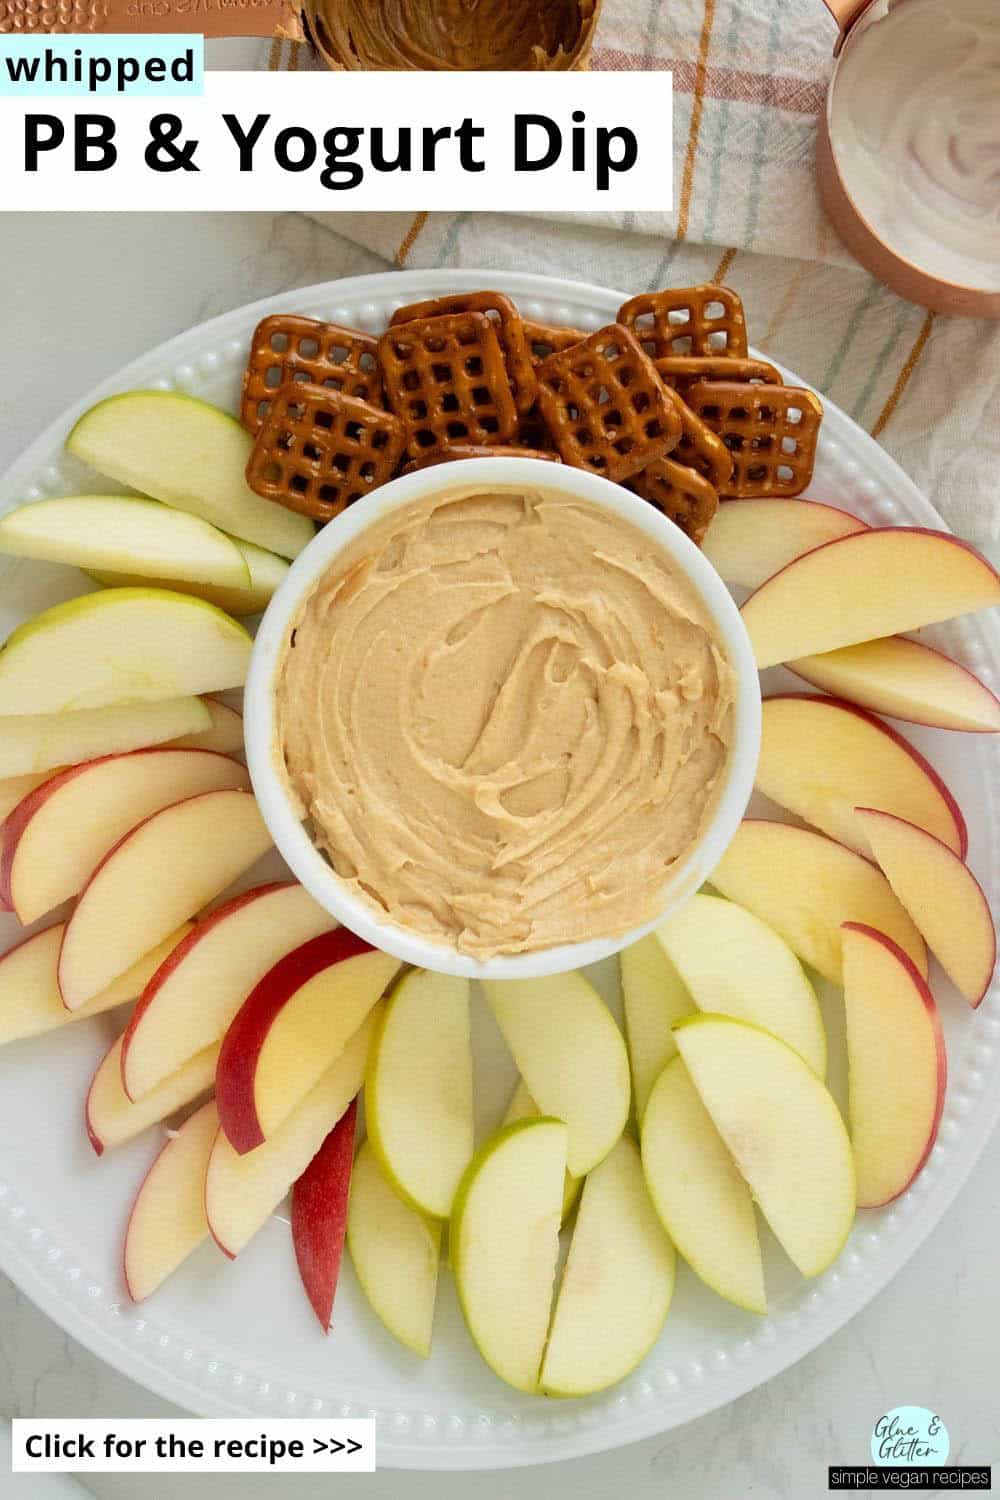 whipped peanut butter yogurt dip with fruit and pretzels for dipping on a white plate, text overlay